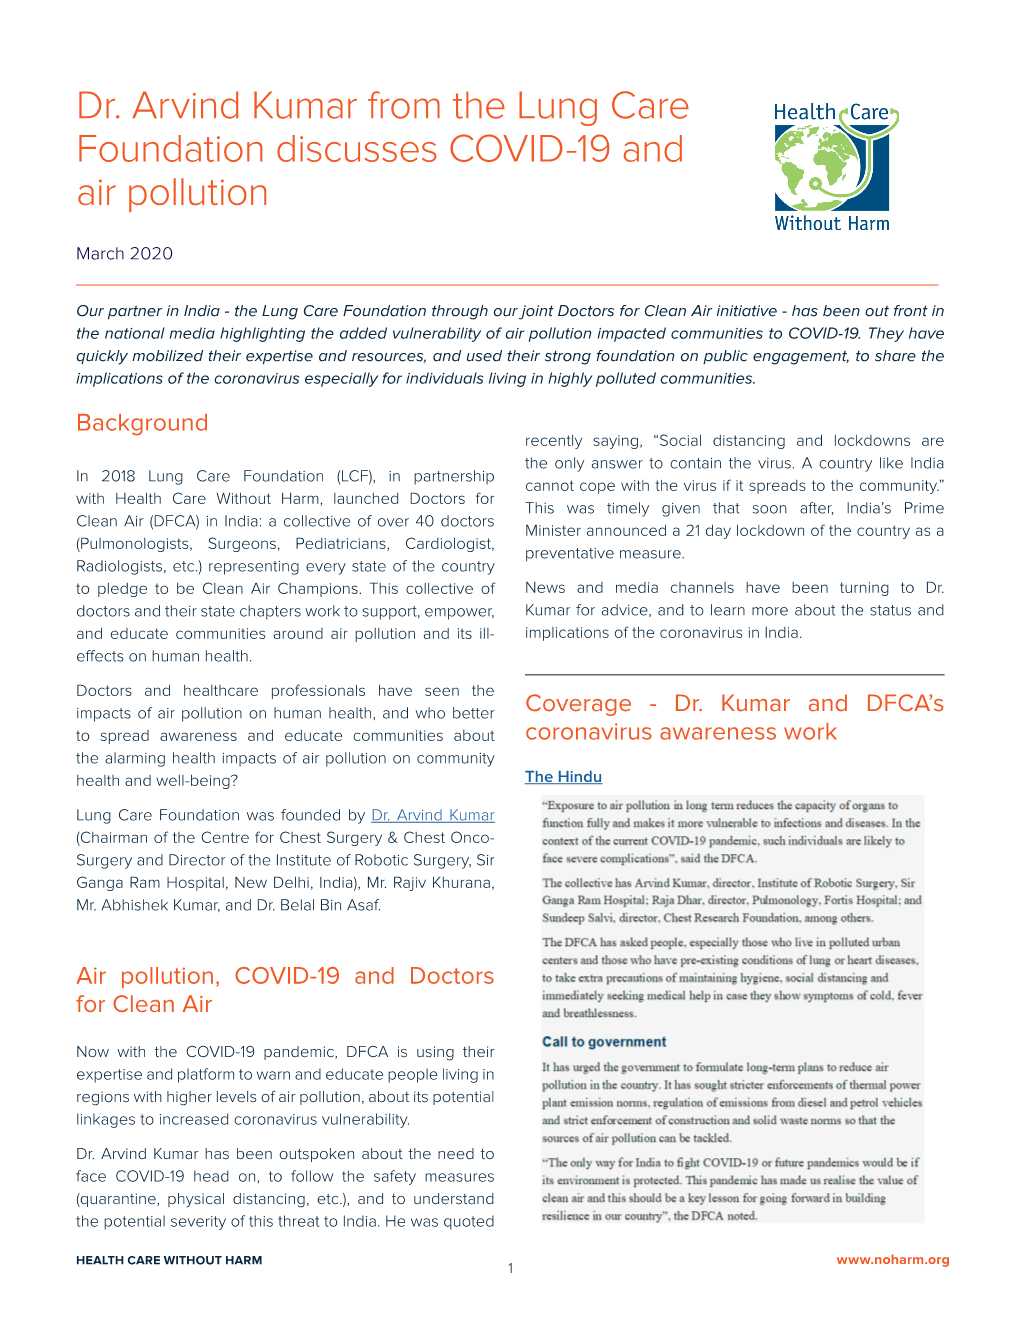 Dr. Arvind Kumar from the Lung Care Foundation Discusses COVID-19 and Air Pollution